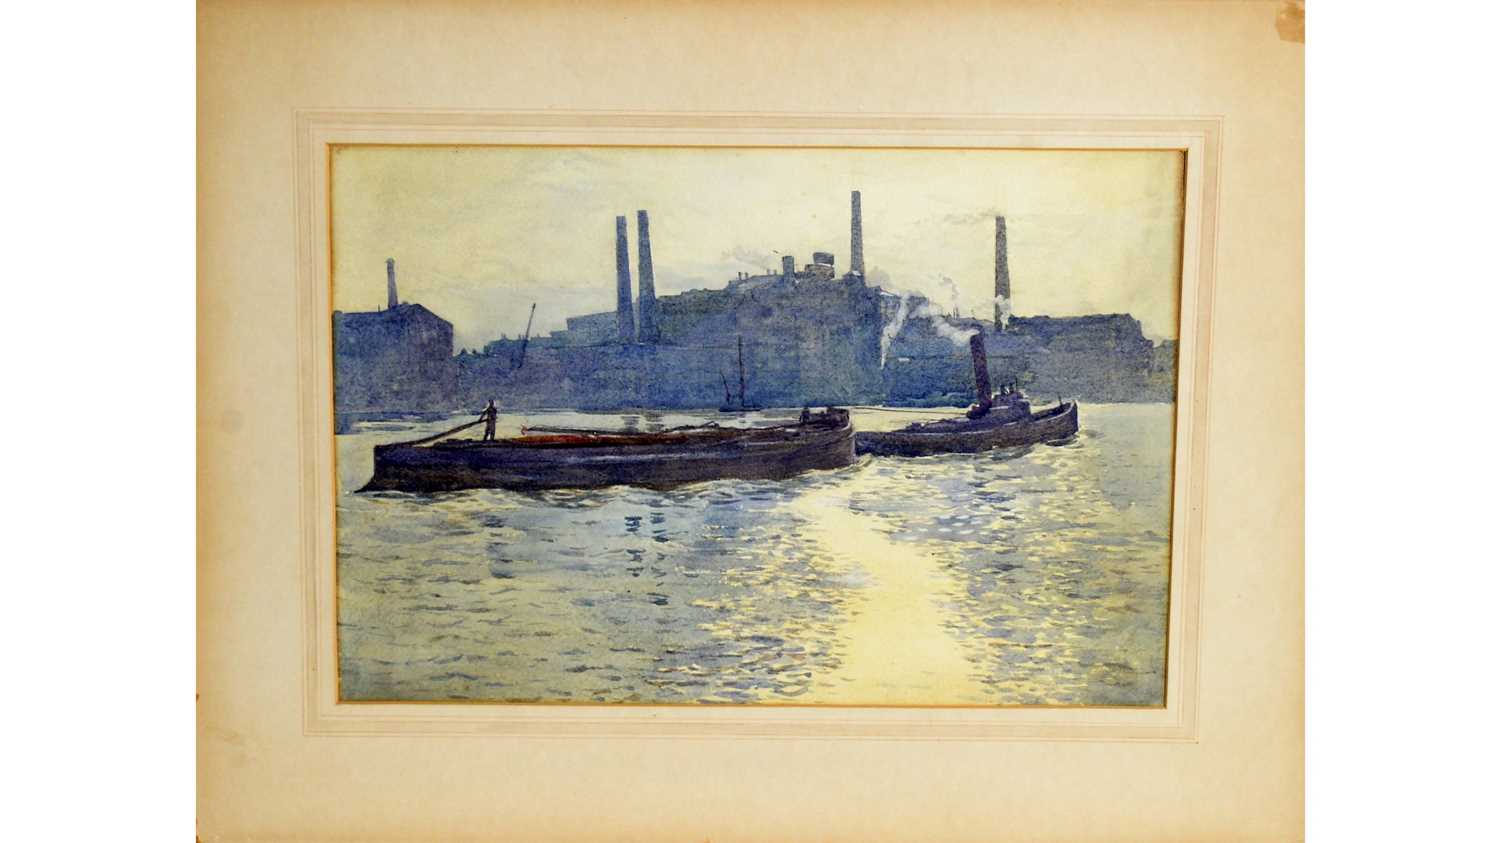 Lot 836 - Late 19th Century British School - Tug Boat and Barge at Dusk  | watercolour